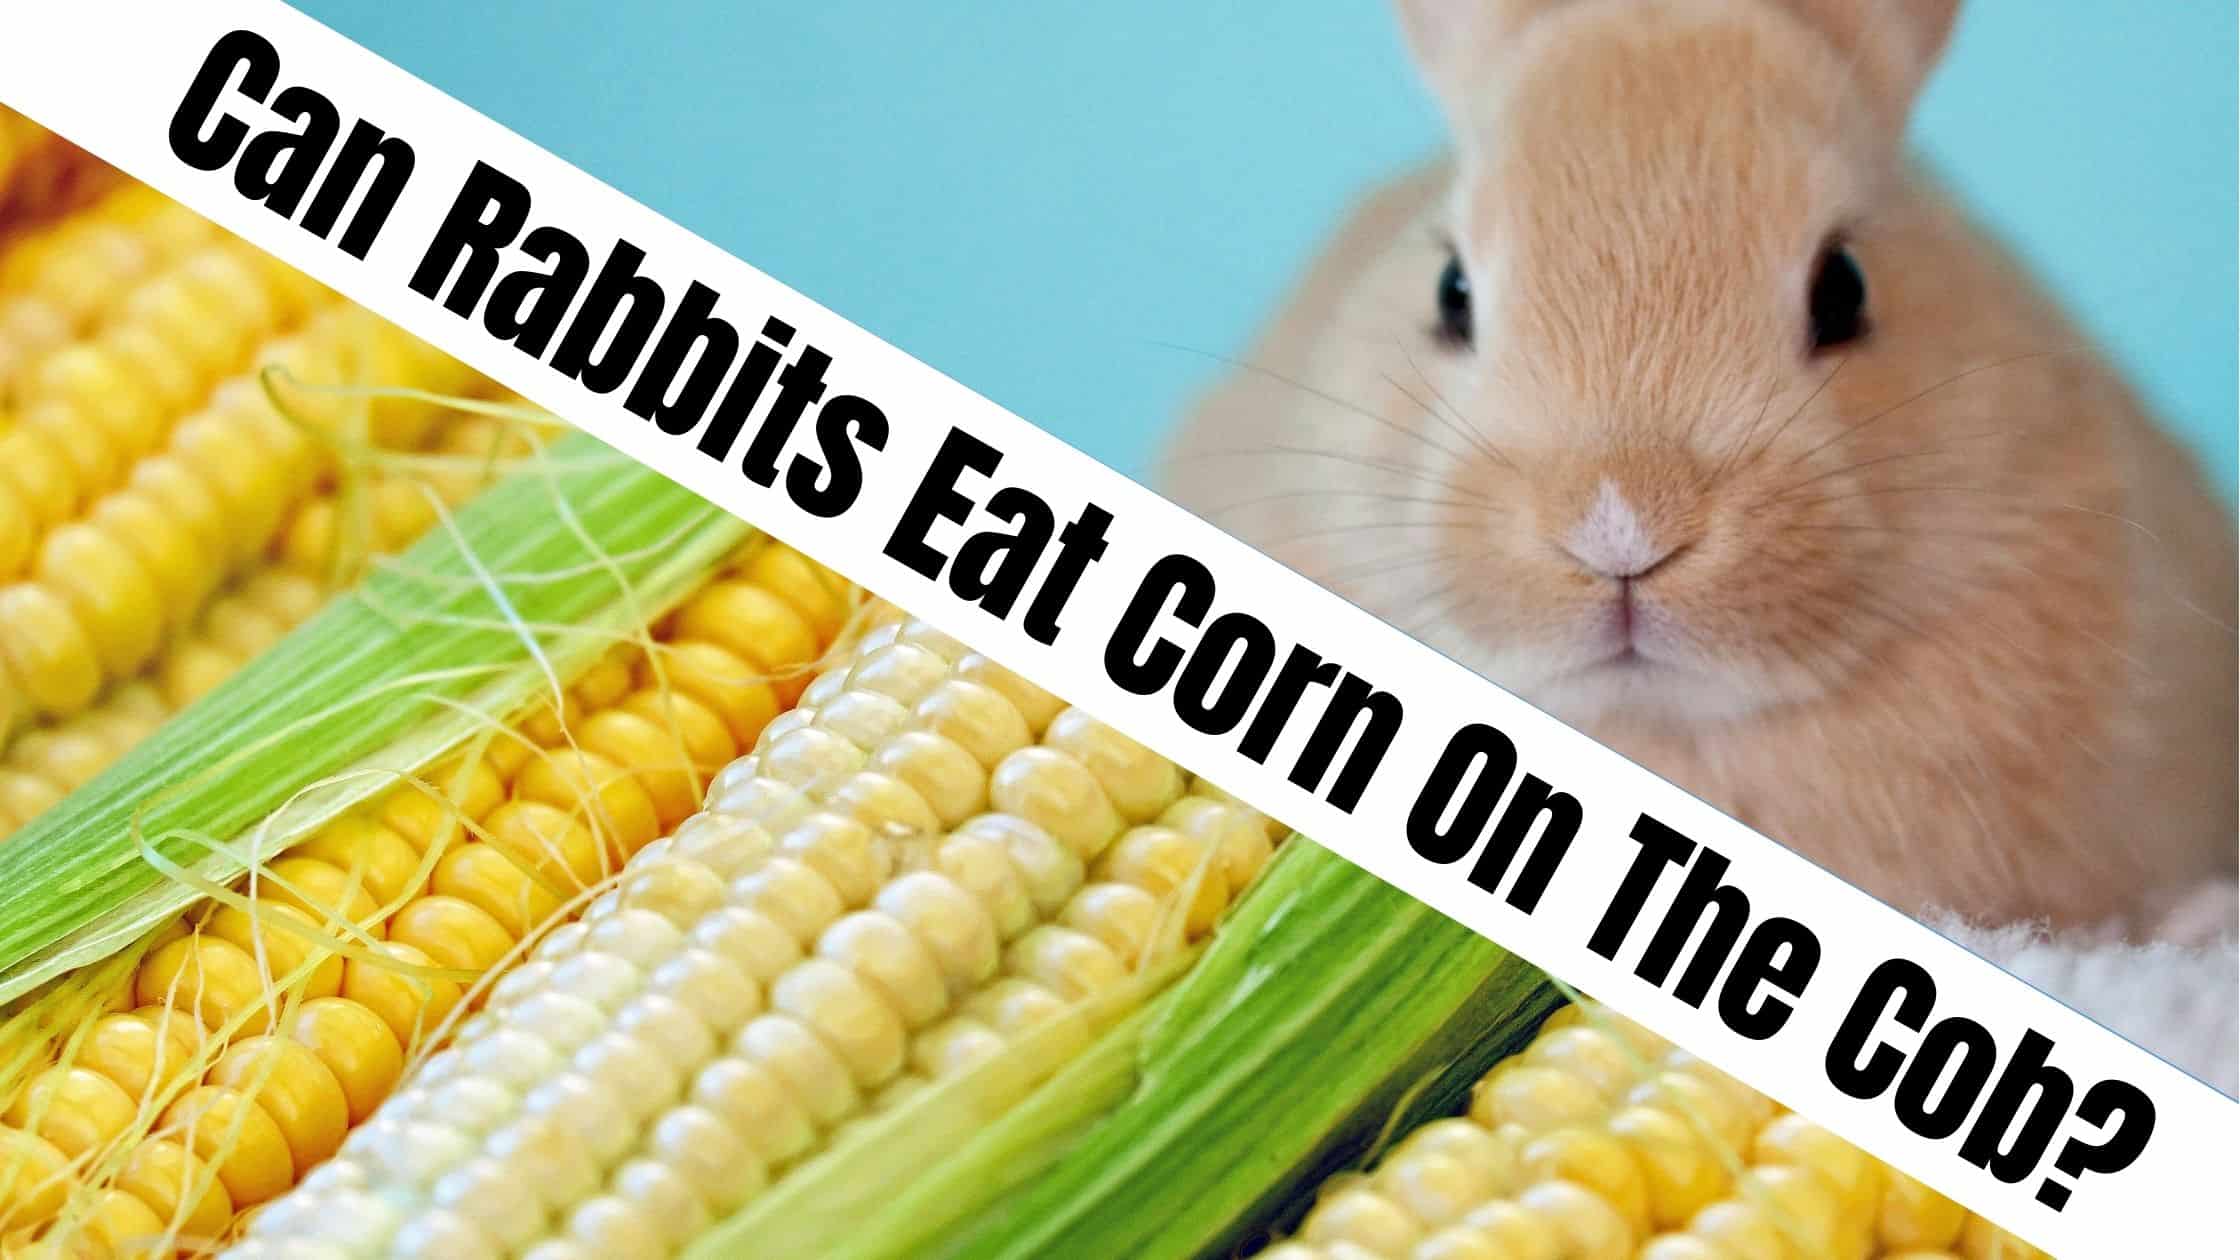 Can Rabbits Eat Corn on the Cob?